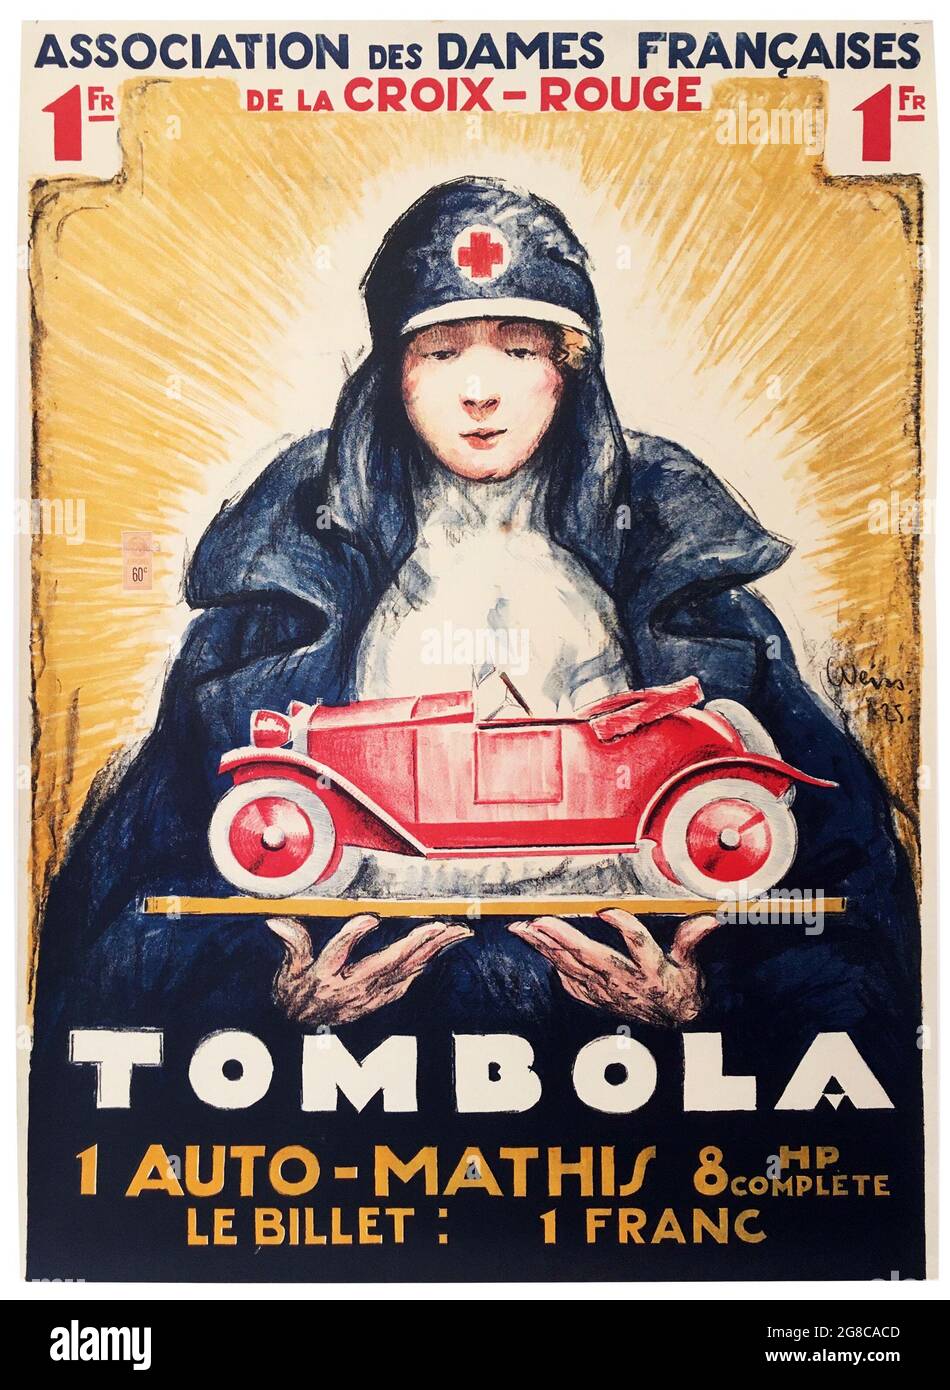 'TOMBOLA' - Vintage French Art Deco Advertising Poster. C 1920. Stock Photo